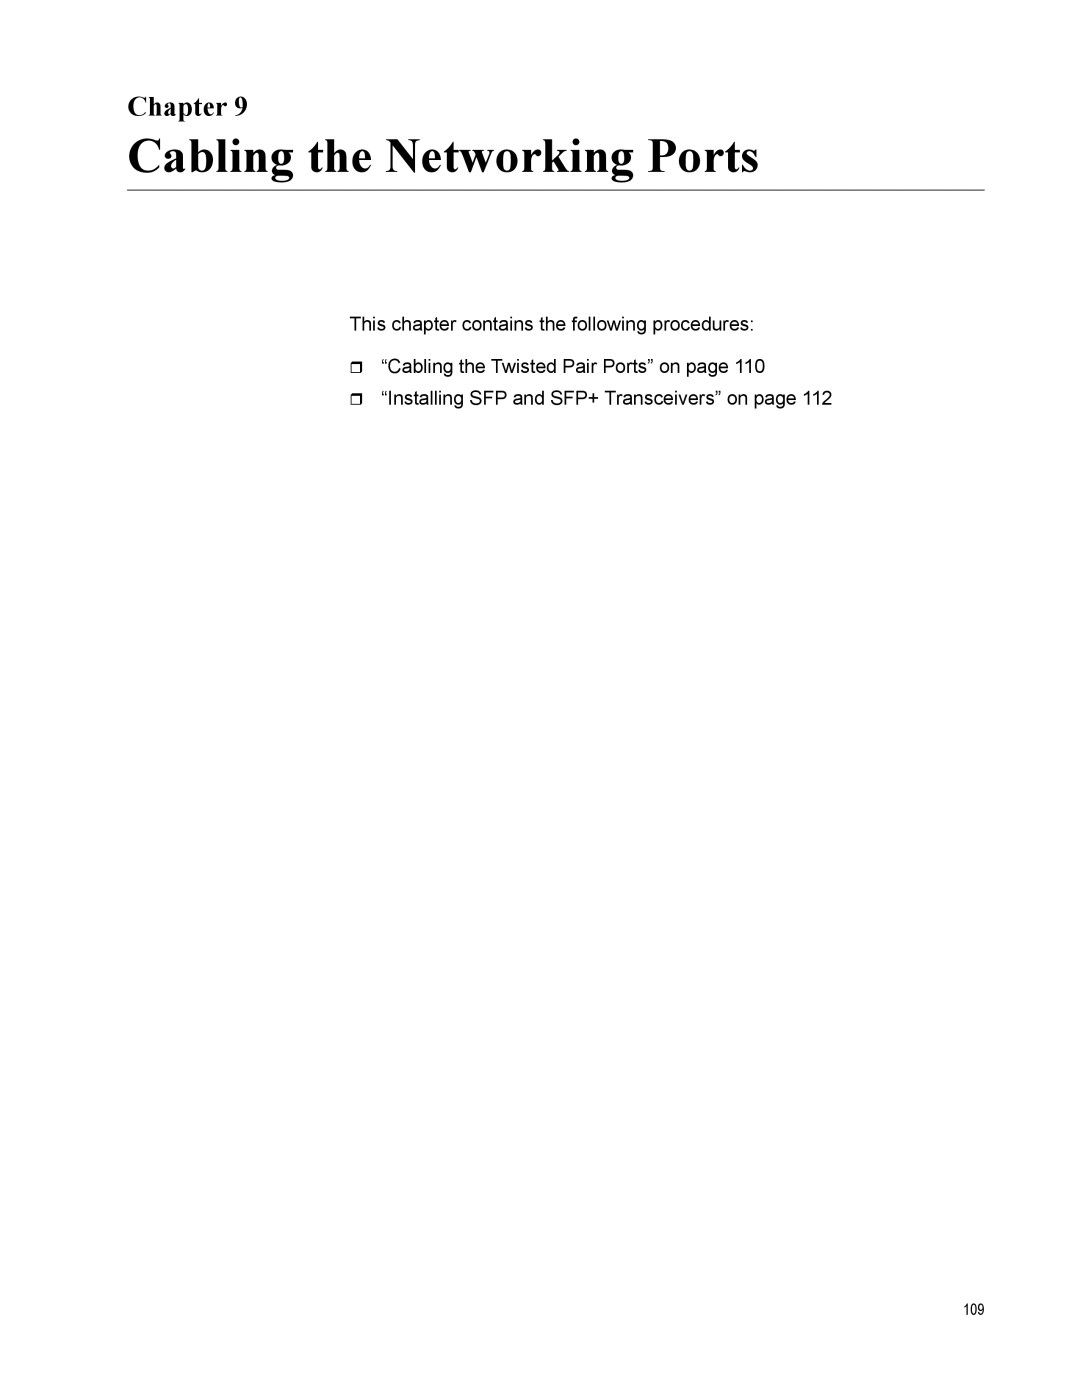 Allied Telesis AT-IX5-28GPX manual Cabling the Networking Ports, Chapter 